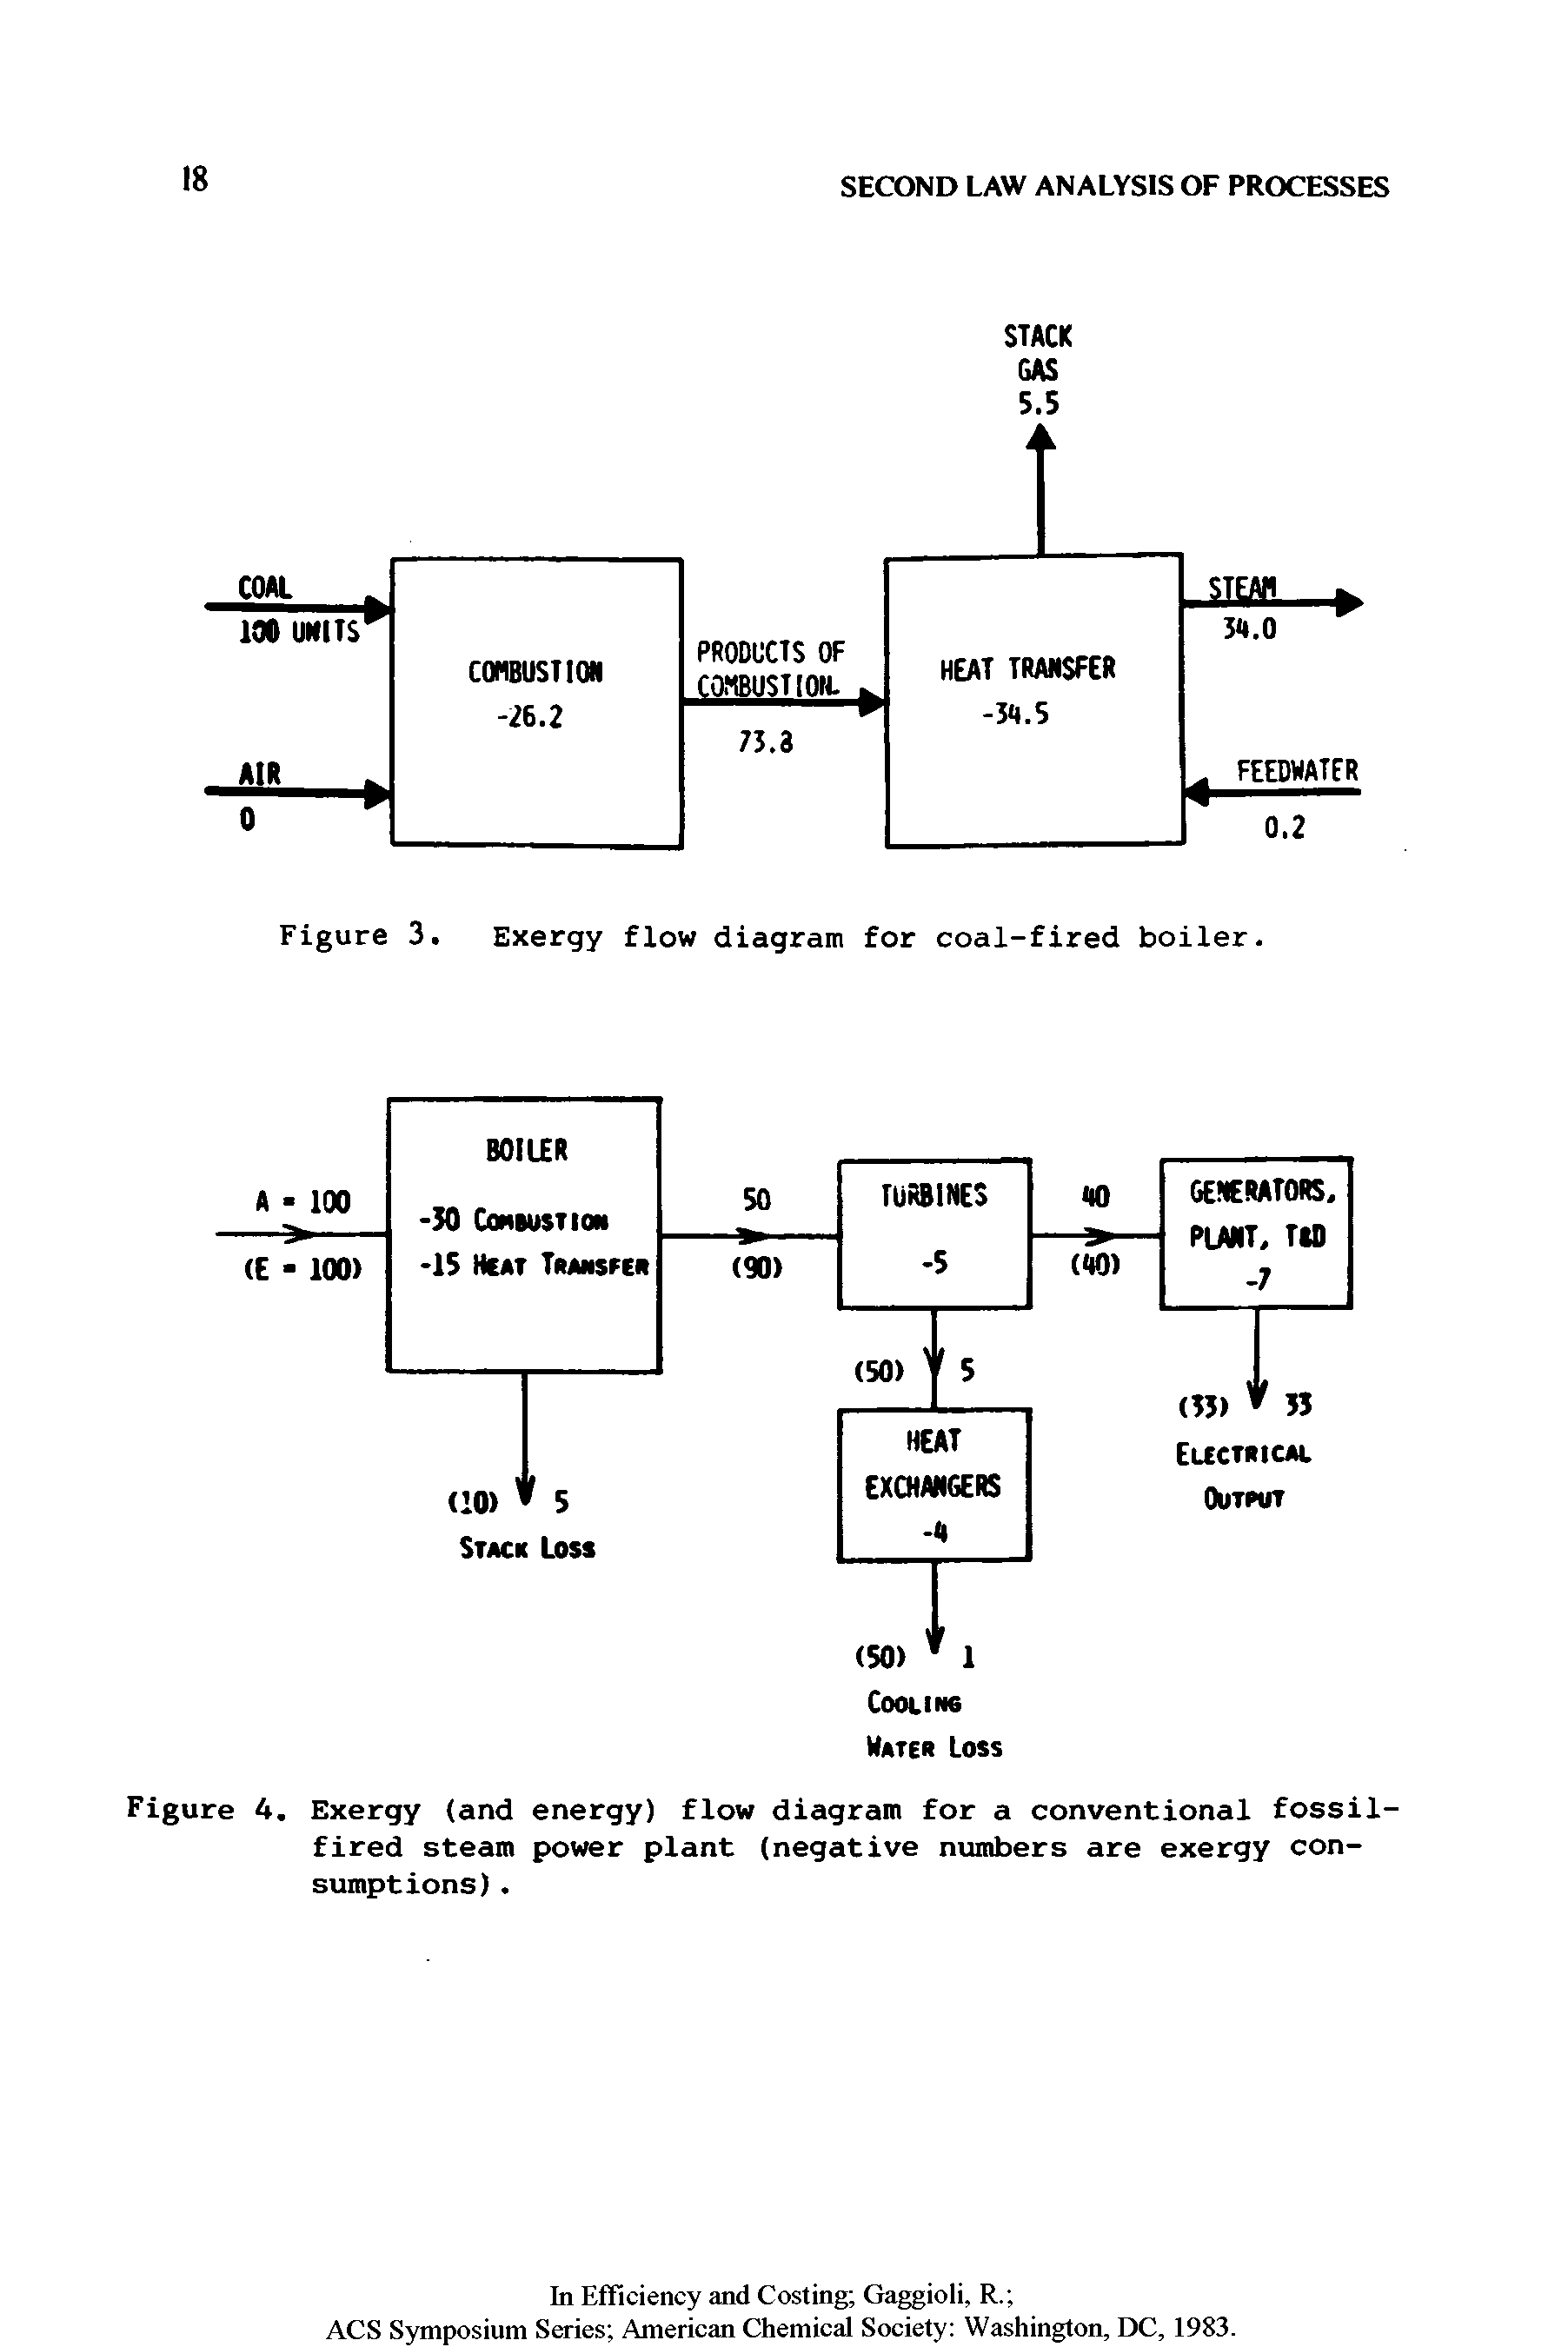 Figure 4. Exergy (and energy) flow diagram for a conventional fossil-fired steam power plant (negative numbers are exergy consumptions). ...